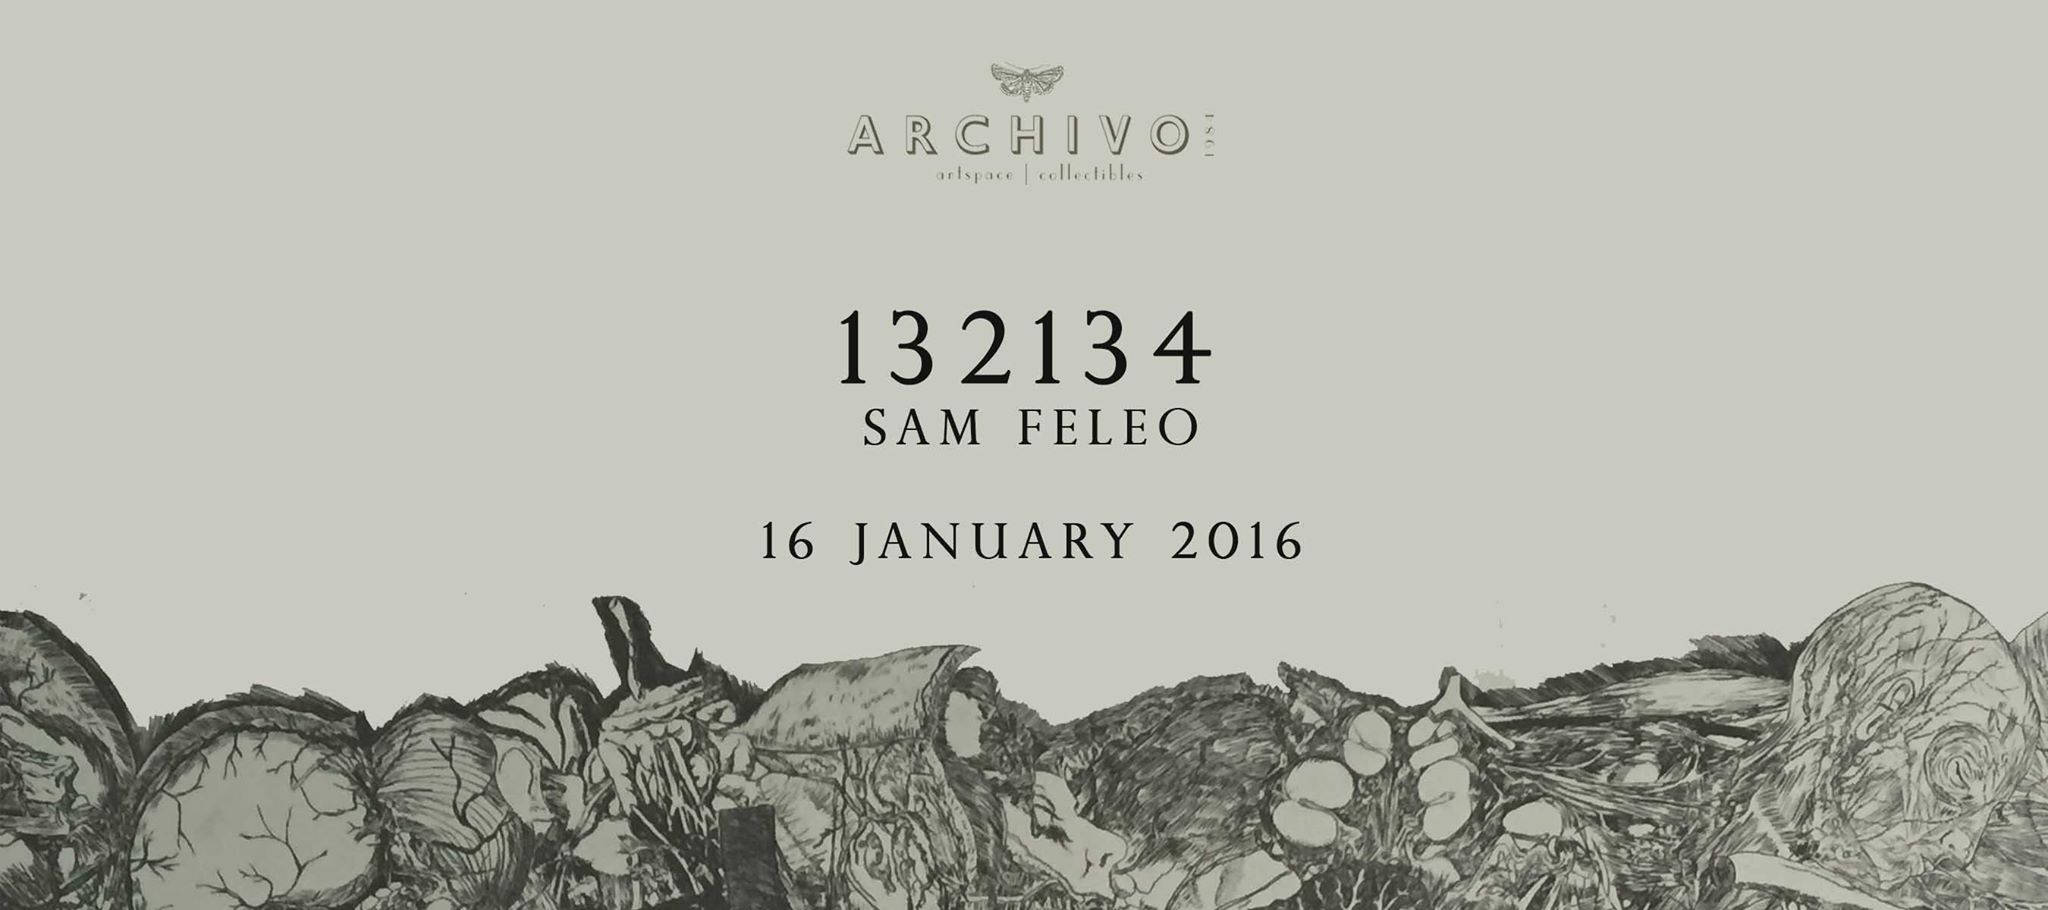 SAM FELEO | 132134 clock Saturday, January 16 at 6 PM - 9 PM Next Week · 89°F / 71°F Clear pin Show Map Archivo 1984 2135 Chino Roces Ave., Makati, Philippines Archivo 1984 is pleased to present Sam Feleo’s latest works in “132134” opening on SATURDAY, JANUARY 16. Public reception and opening starts at 6:00pm – 9:00pm The exhibition will be on view from Jan 16 till Feb 7 A R C H I V O 1 9 8 4 G A L L E R Y 2nd Level, Warehouse 1, 2135 Chino Roces Avenue, Makati City, Metro Manila, Philippines 1230 Gallery hours: Monday thru Saturdays 1-8 PM | Sundays by appointment For further information please contact via Phone: (02) 832 6169 Email: gallery@archivo1984.com Or visit our website www.archivo1984.com